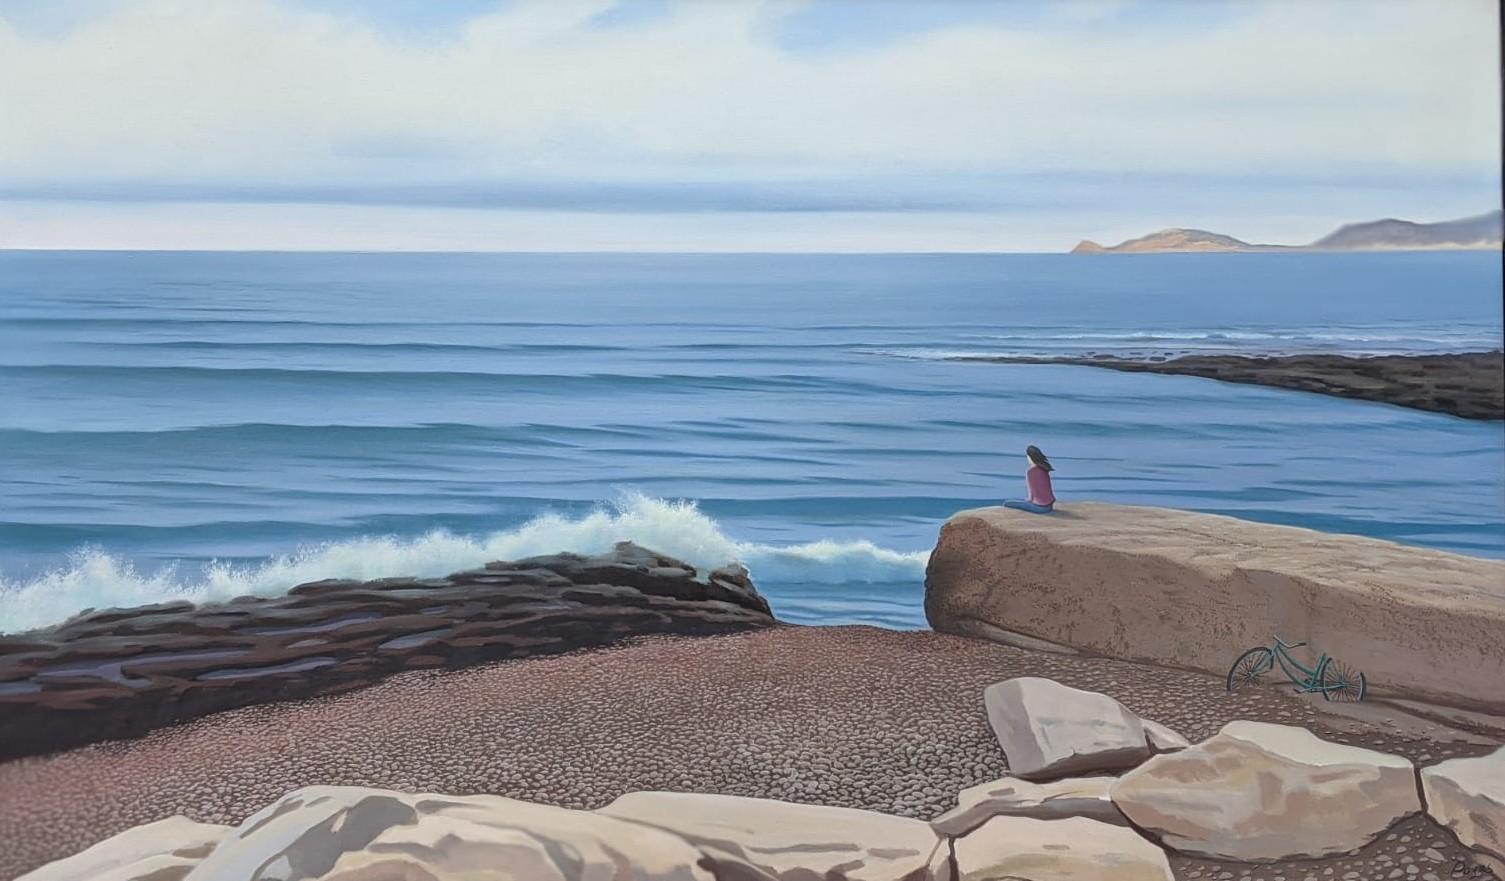 René Monzón Relova “Pozas” Landscape Painting - The Awakening - Surreal Landscape of a Lone Figure and the Sea, Oil on Canvas